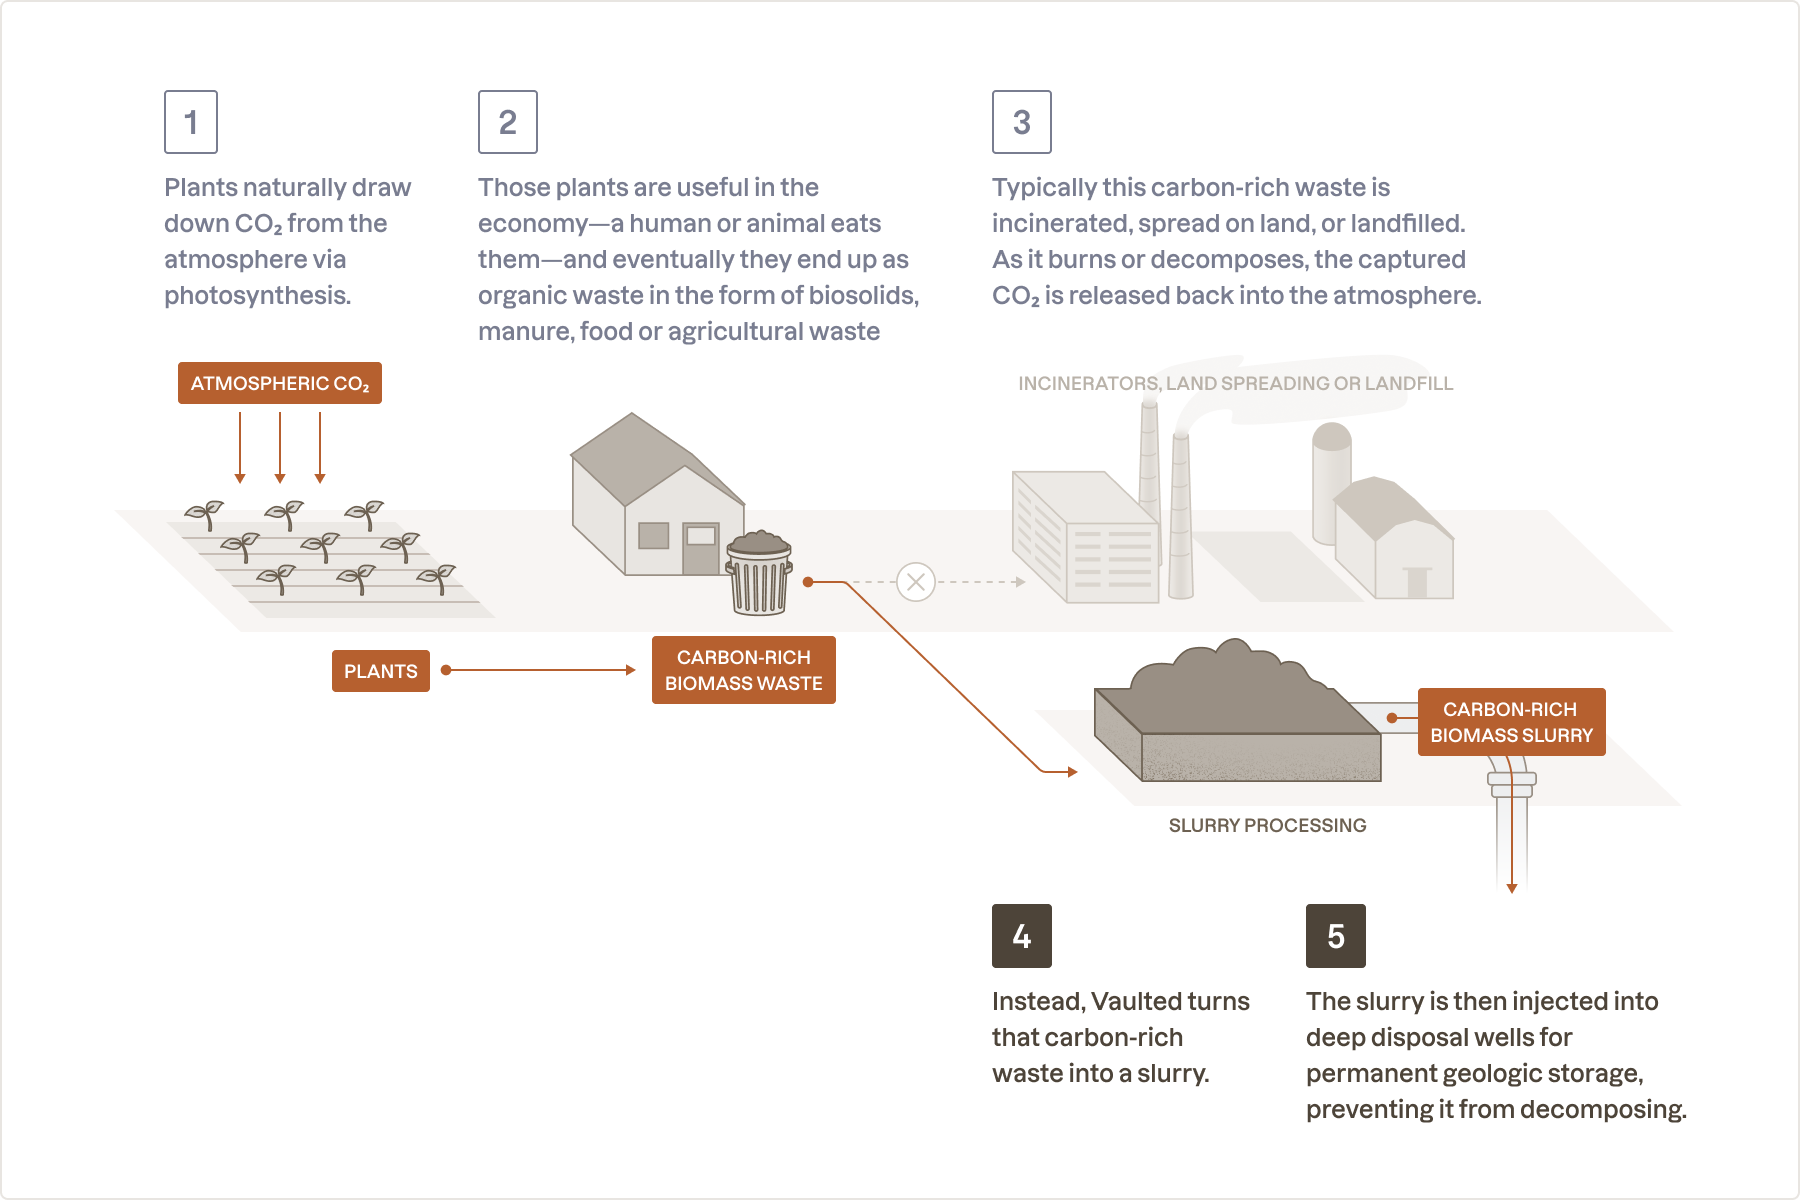 Vaulted’s method of removing CO₂ via underground injection of waste biomass.